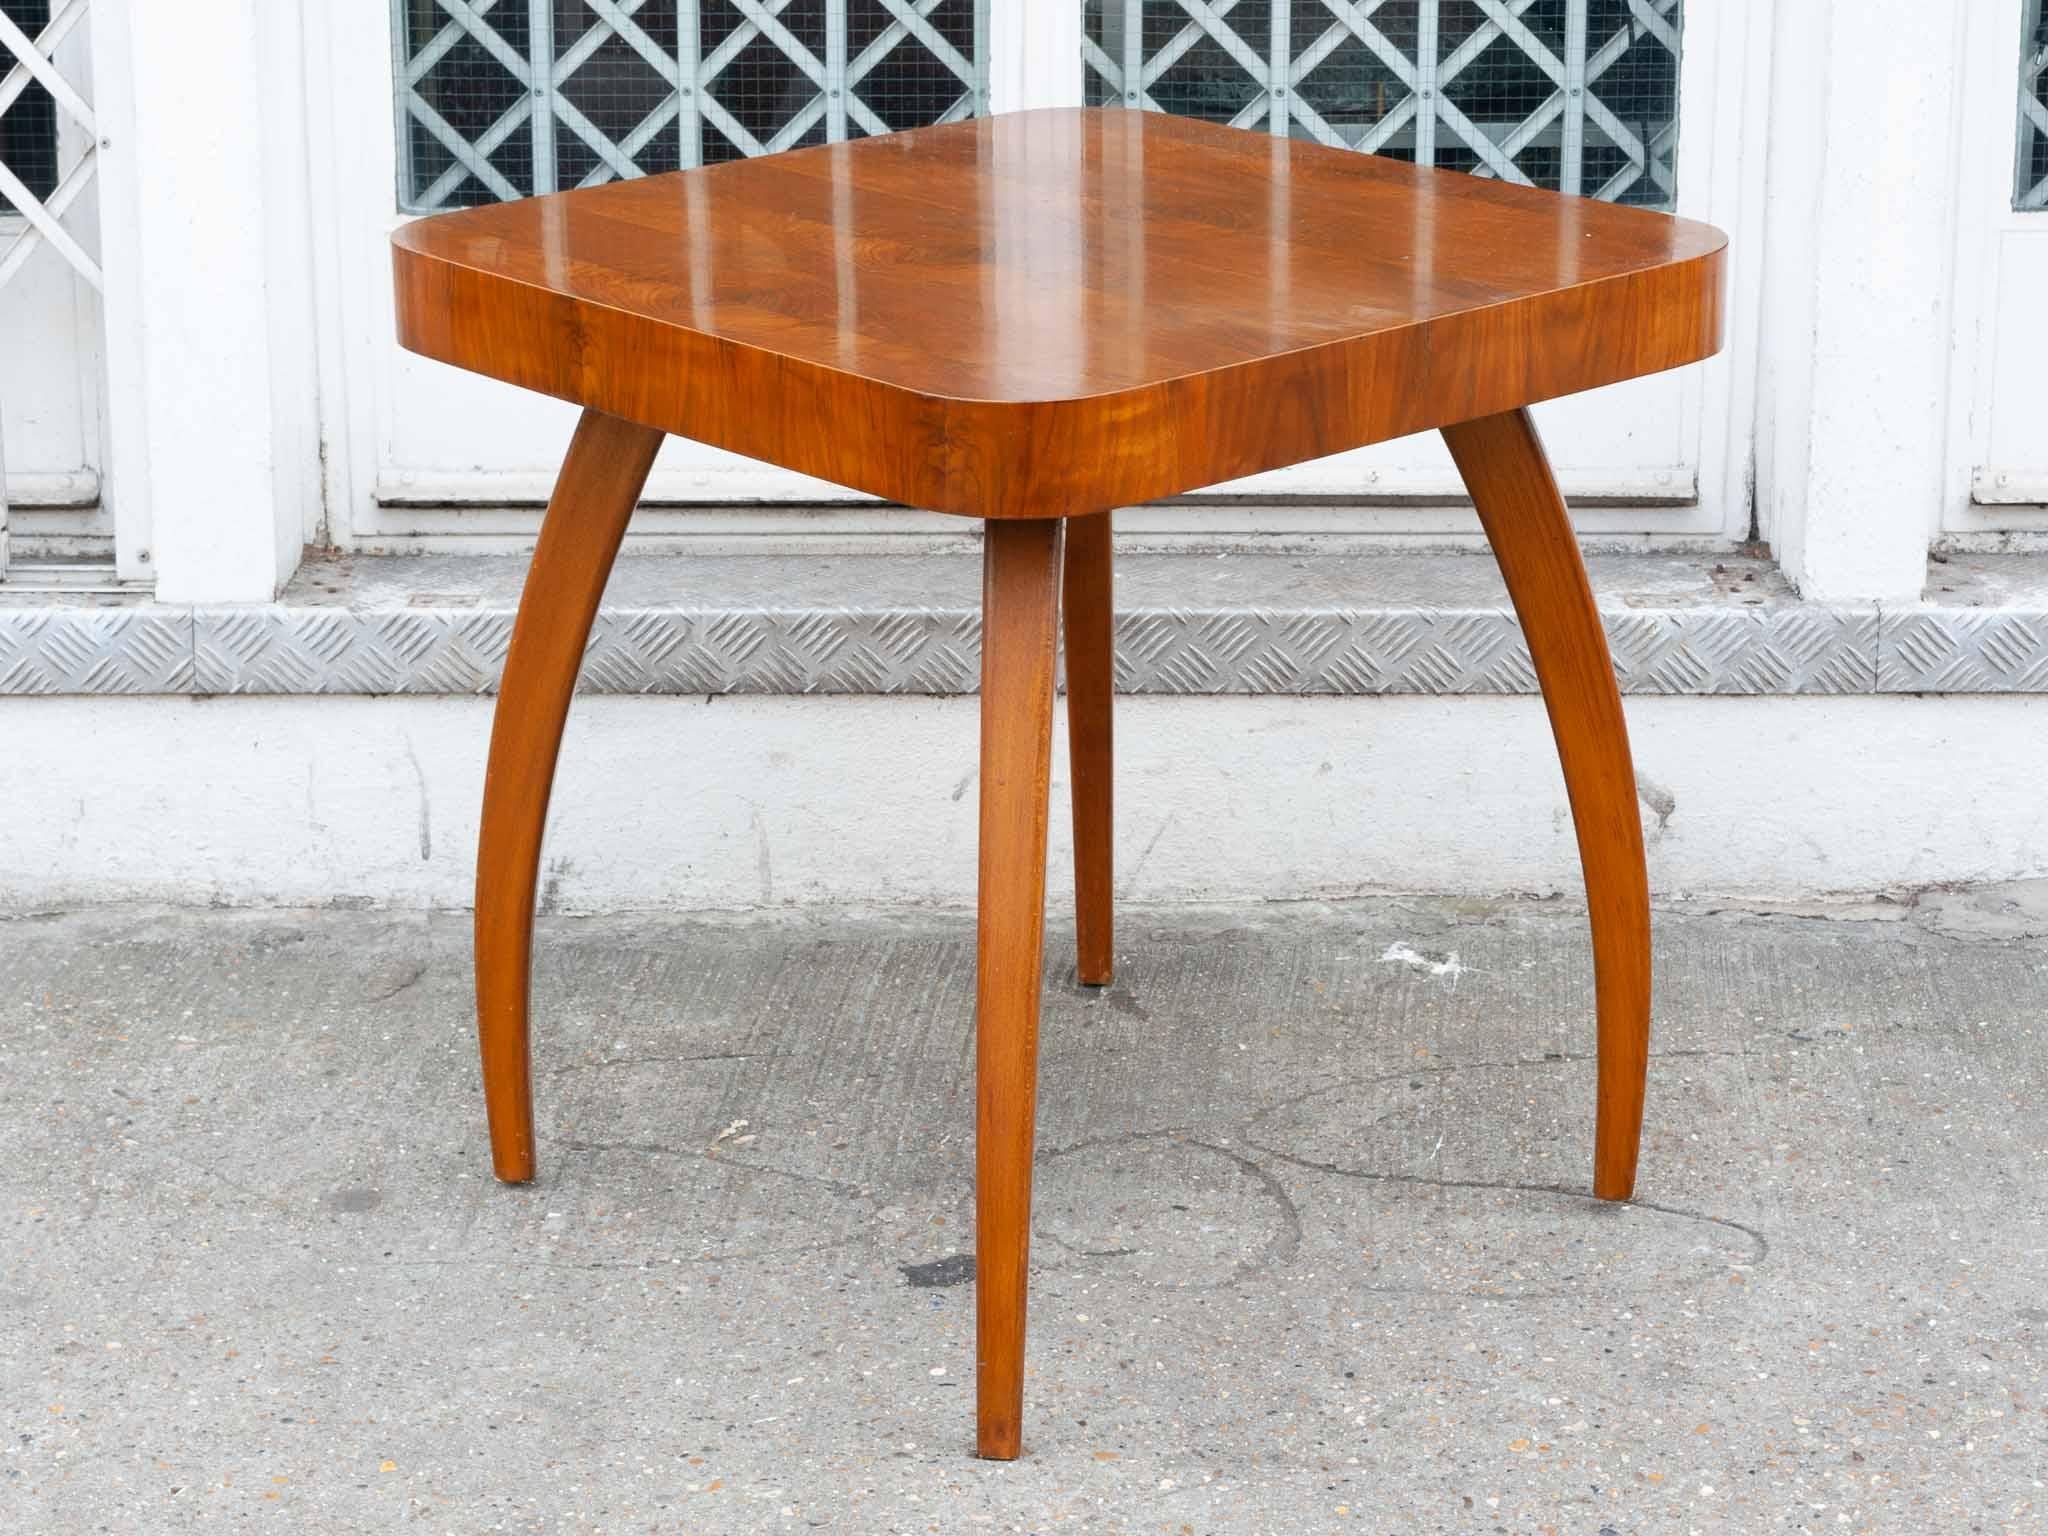 Art Deco 'Spider' walnut coffee or side table by Jindrich Halabala for Spojené UP Zavody. Produced in the 1930s in the former Czechoslovakia. Walnut veneered.
Model H259. In very good vintage condition.